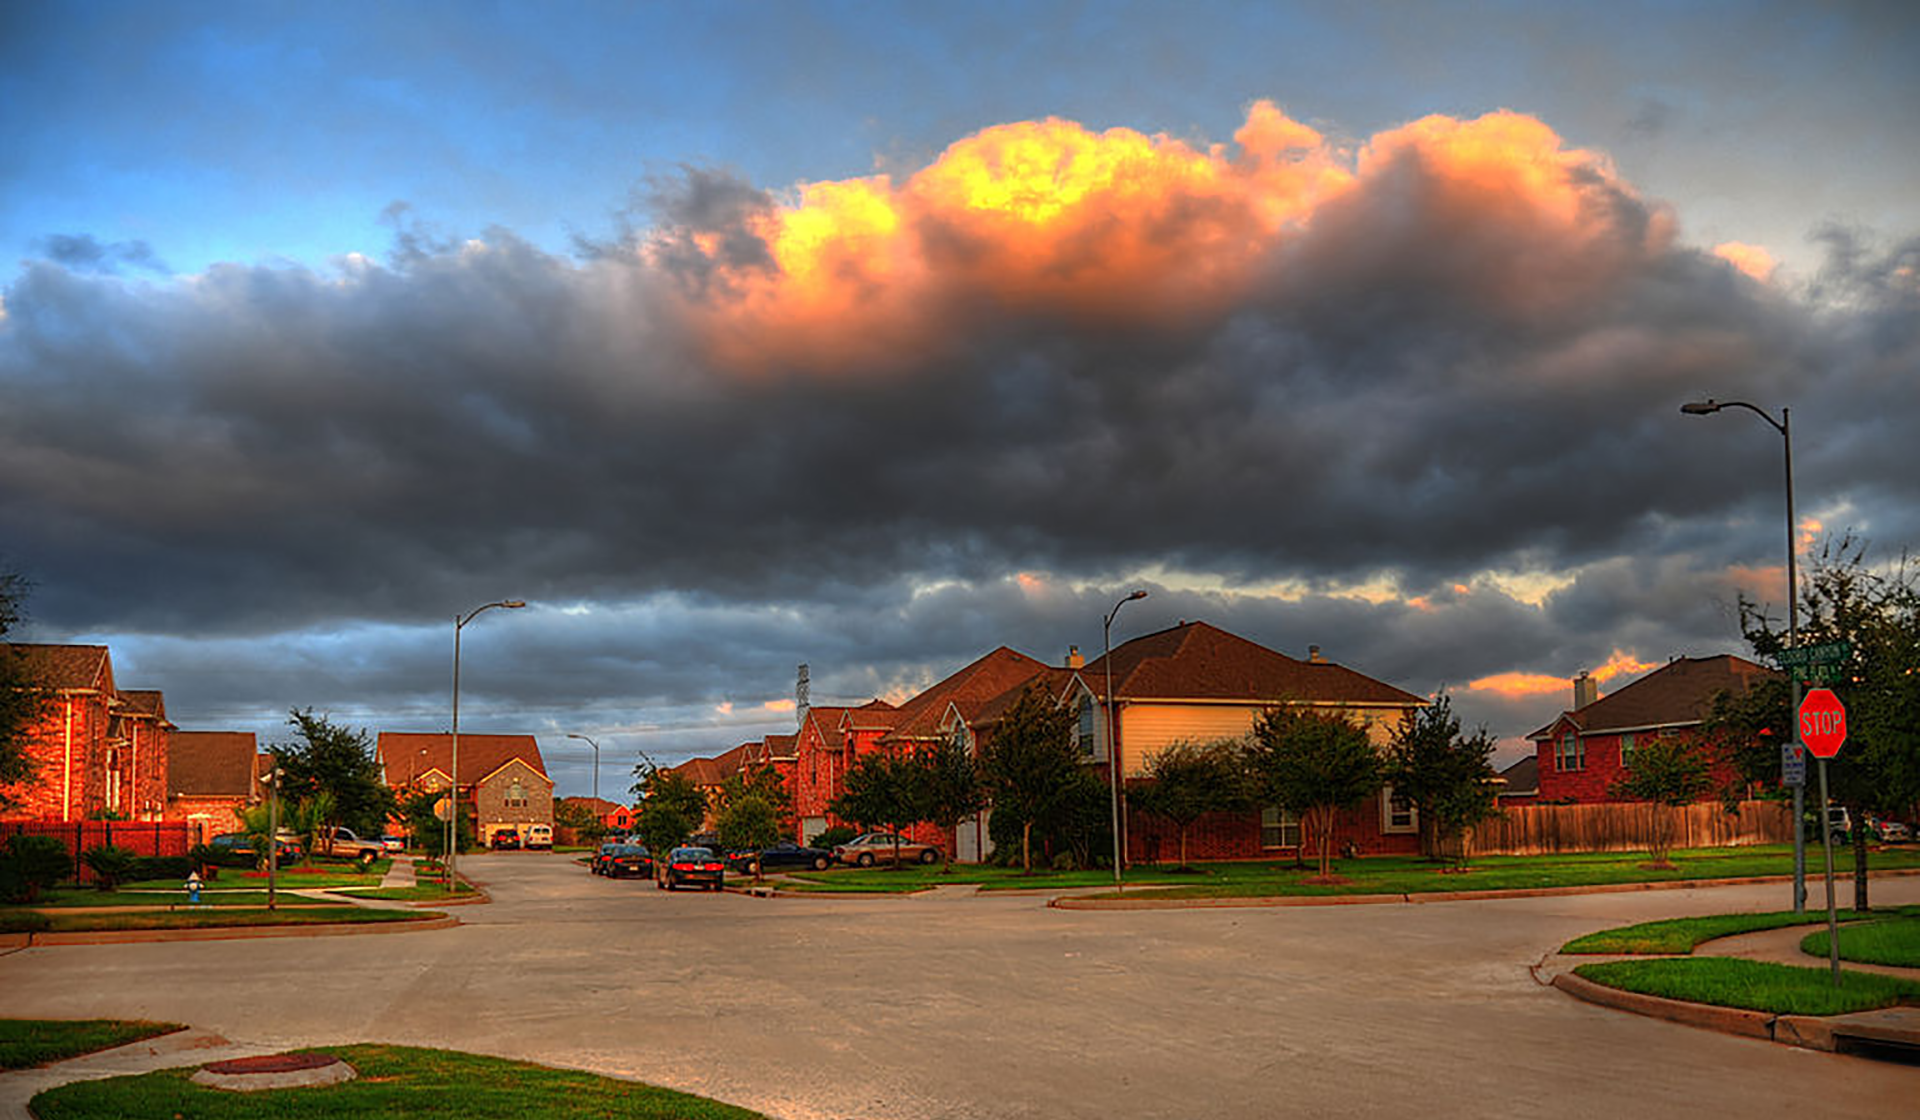 Storm clouds on the horizon, with houses on the frontground